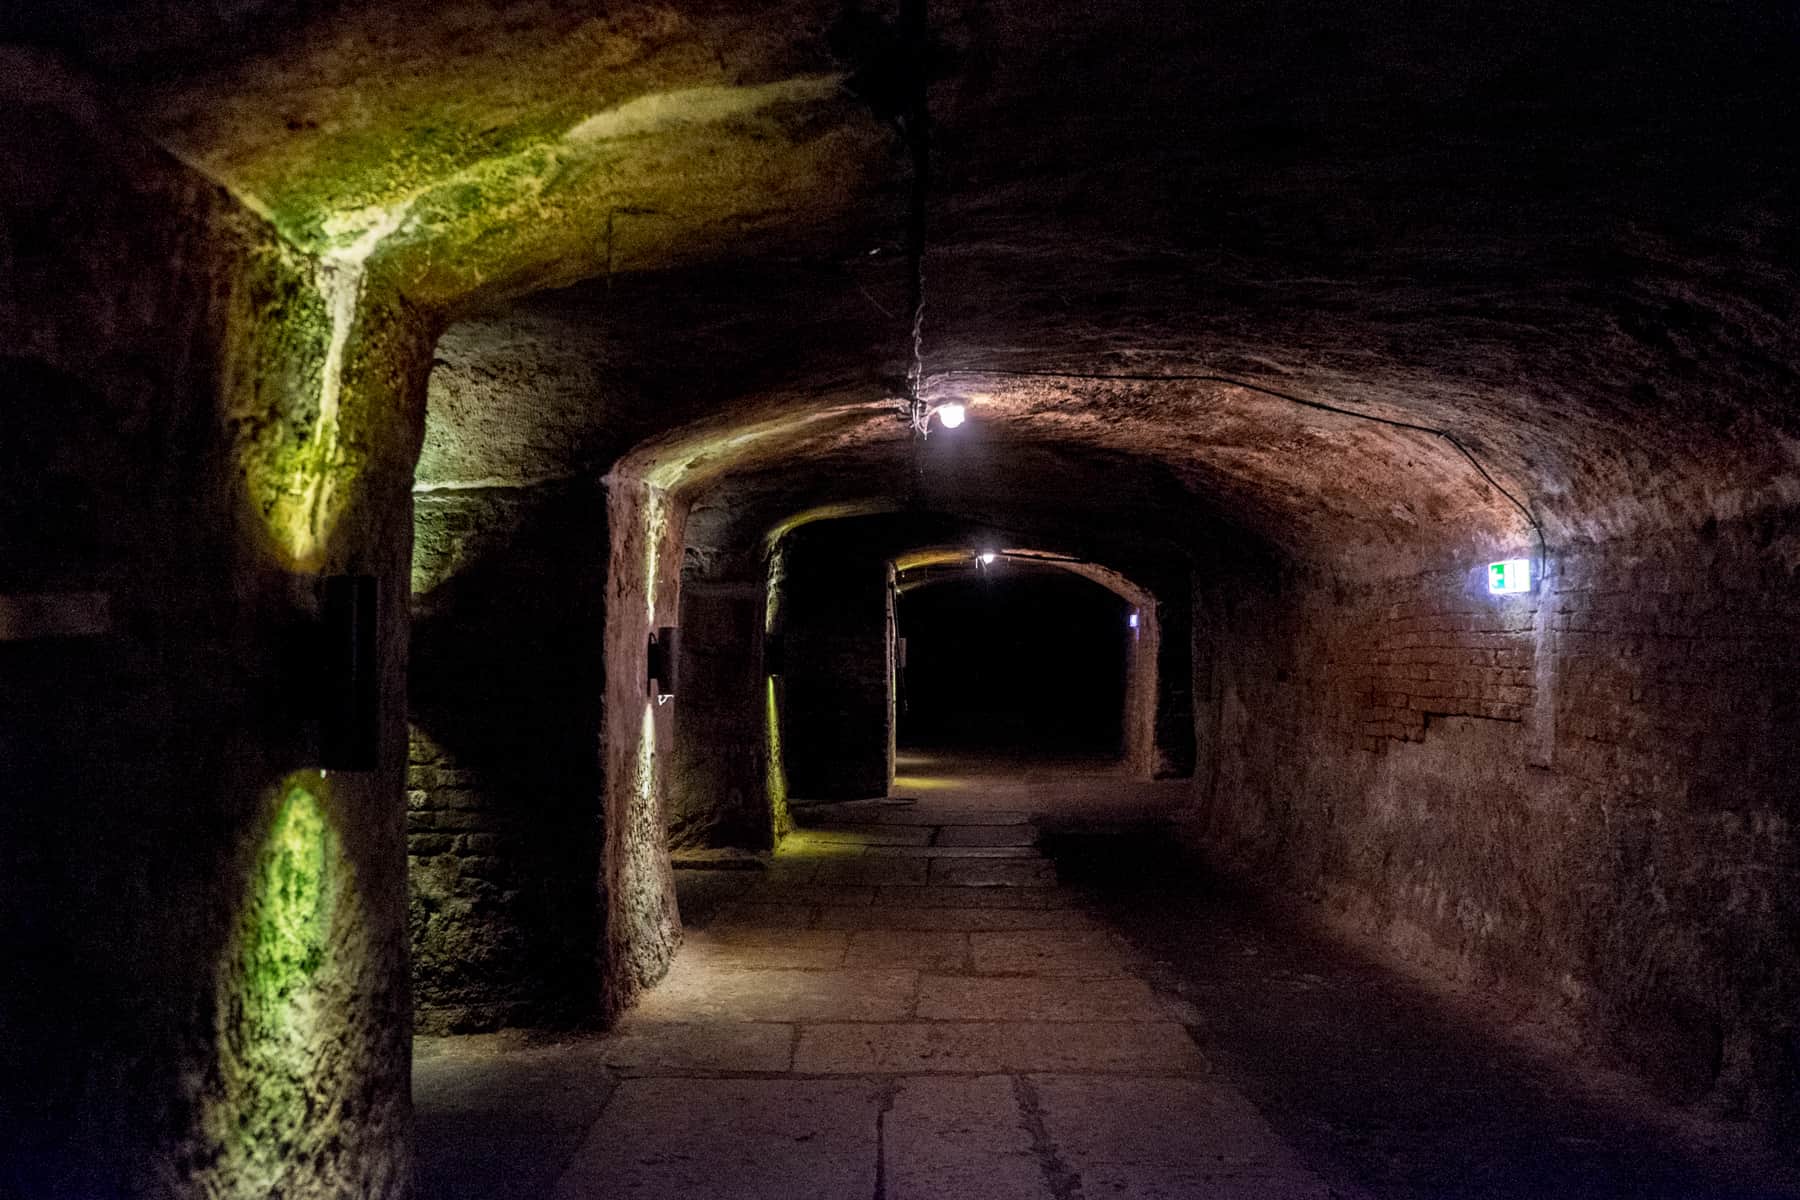 Long dark caverns, lit with yellow, green wall lights mark a pathway inside the historic rock cut beer cellars in Nuremberg